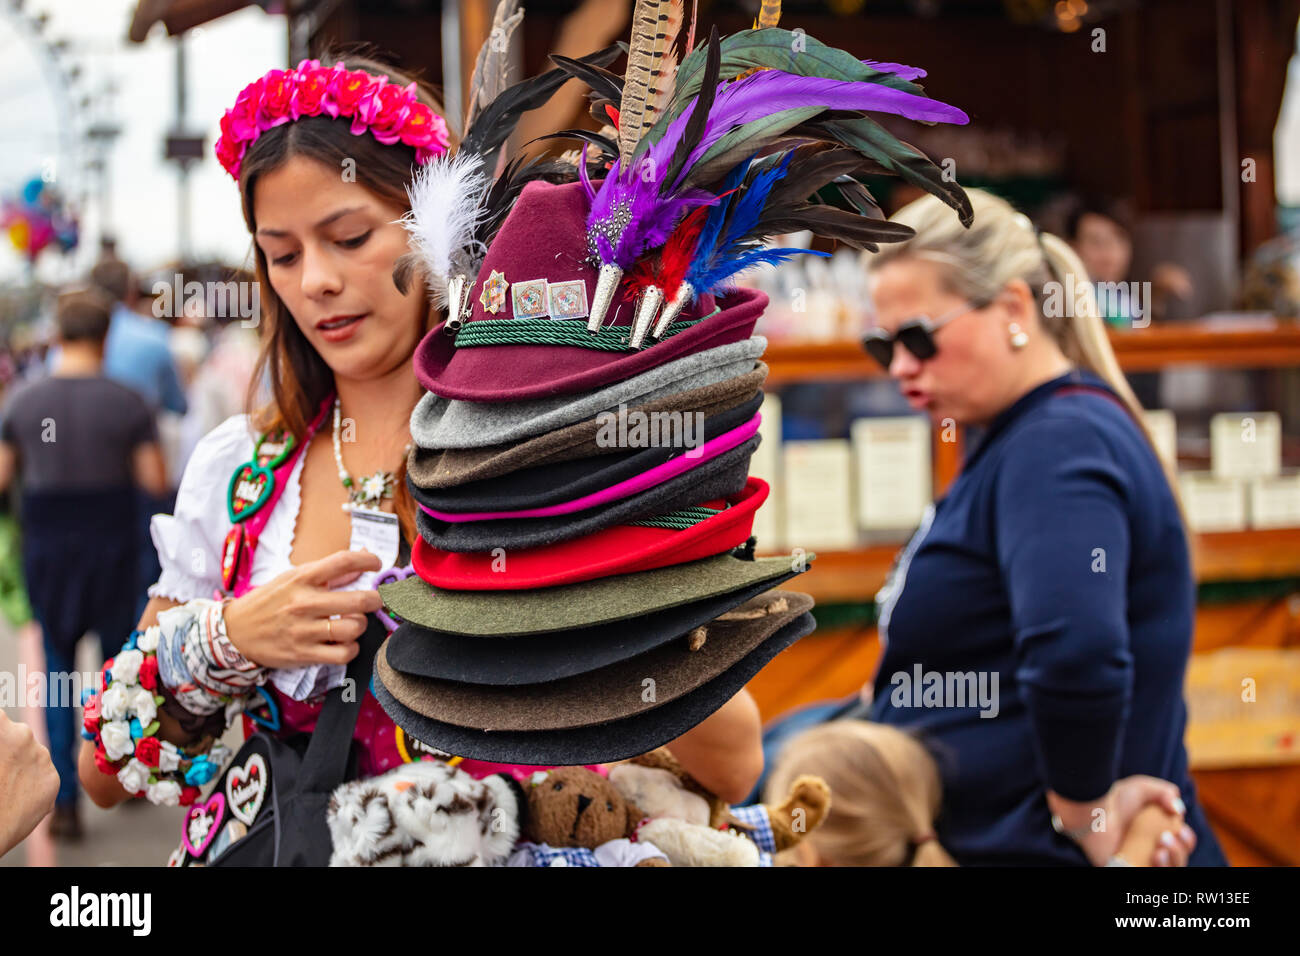 October 7, 2018. Munich, Germany, Oktoberfest, Young beautiful woman in traditional costume holding a stack of tyrolean alpine hats Stock Photo